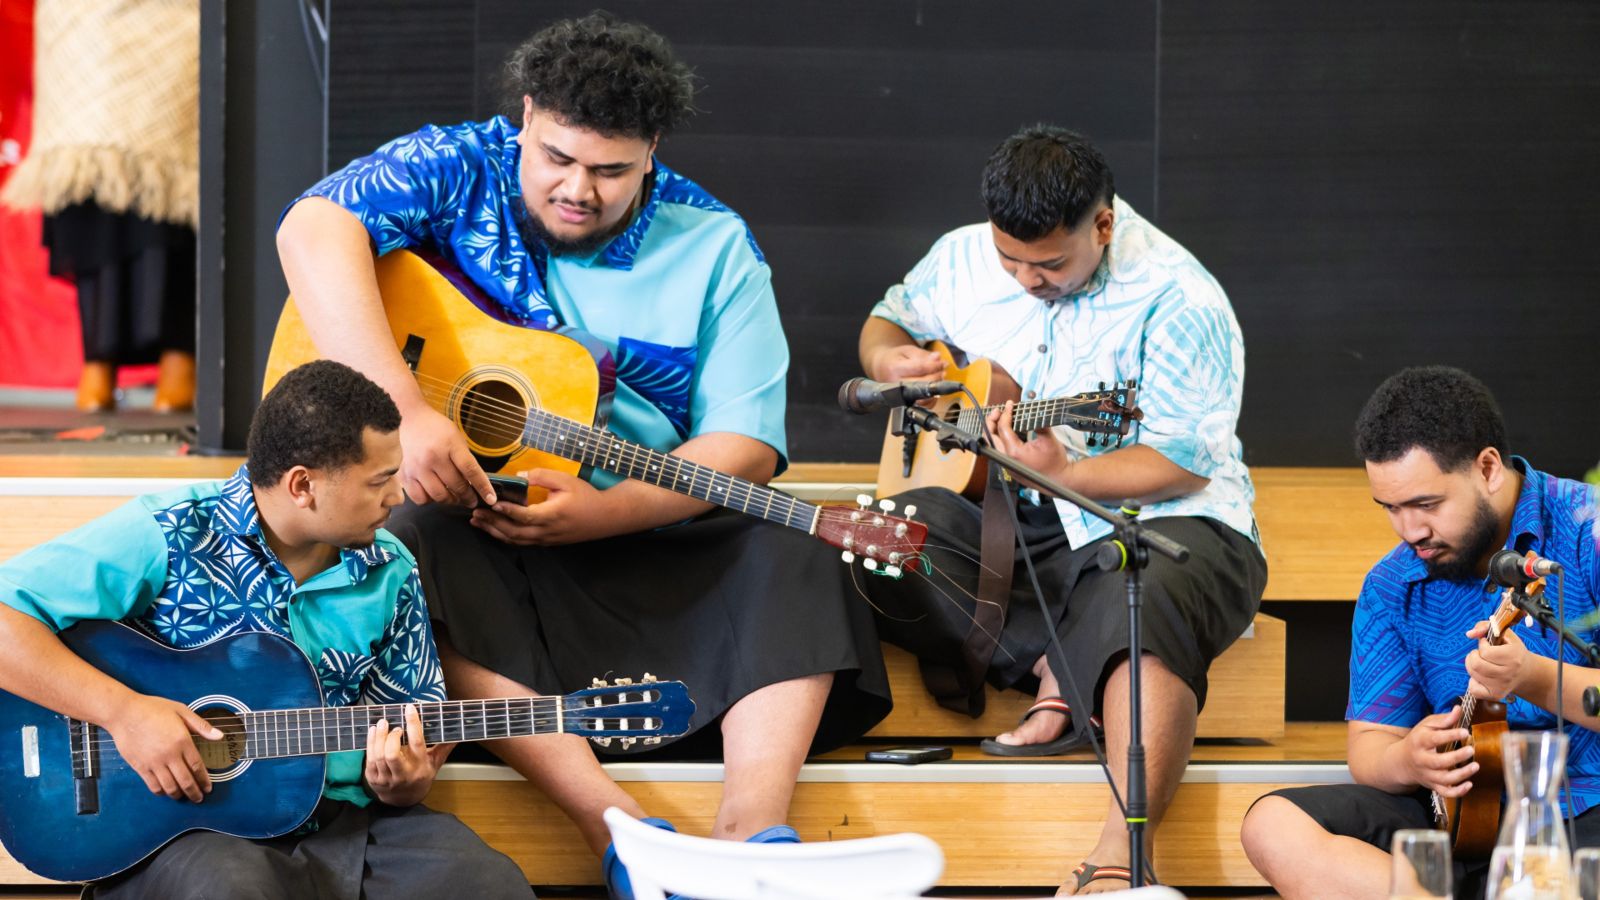 Four Pasifika boys sitting on the stage with guitars